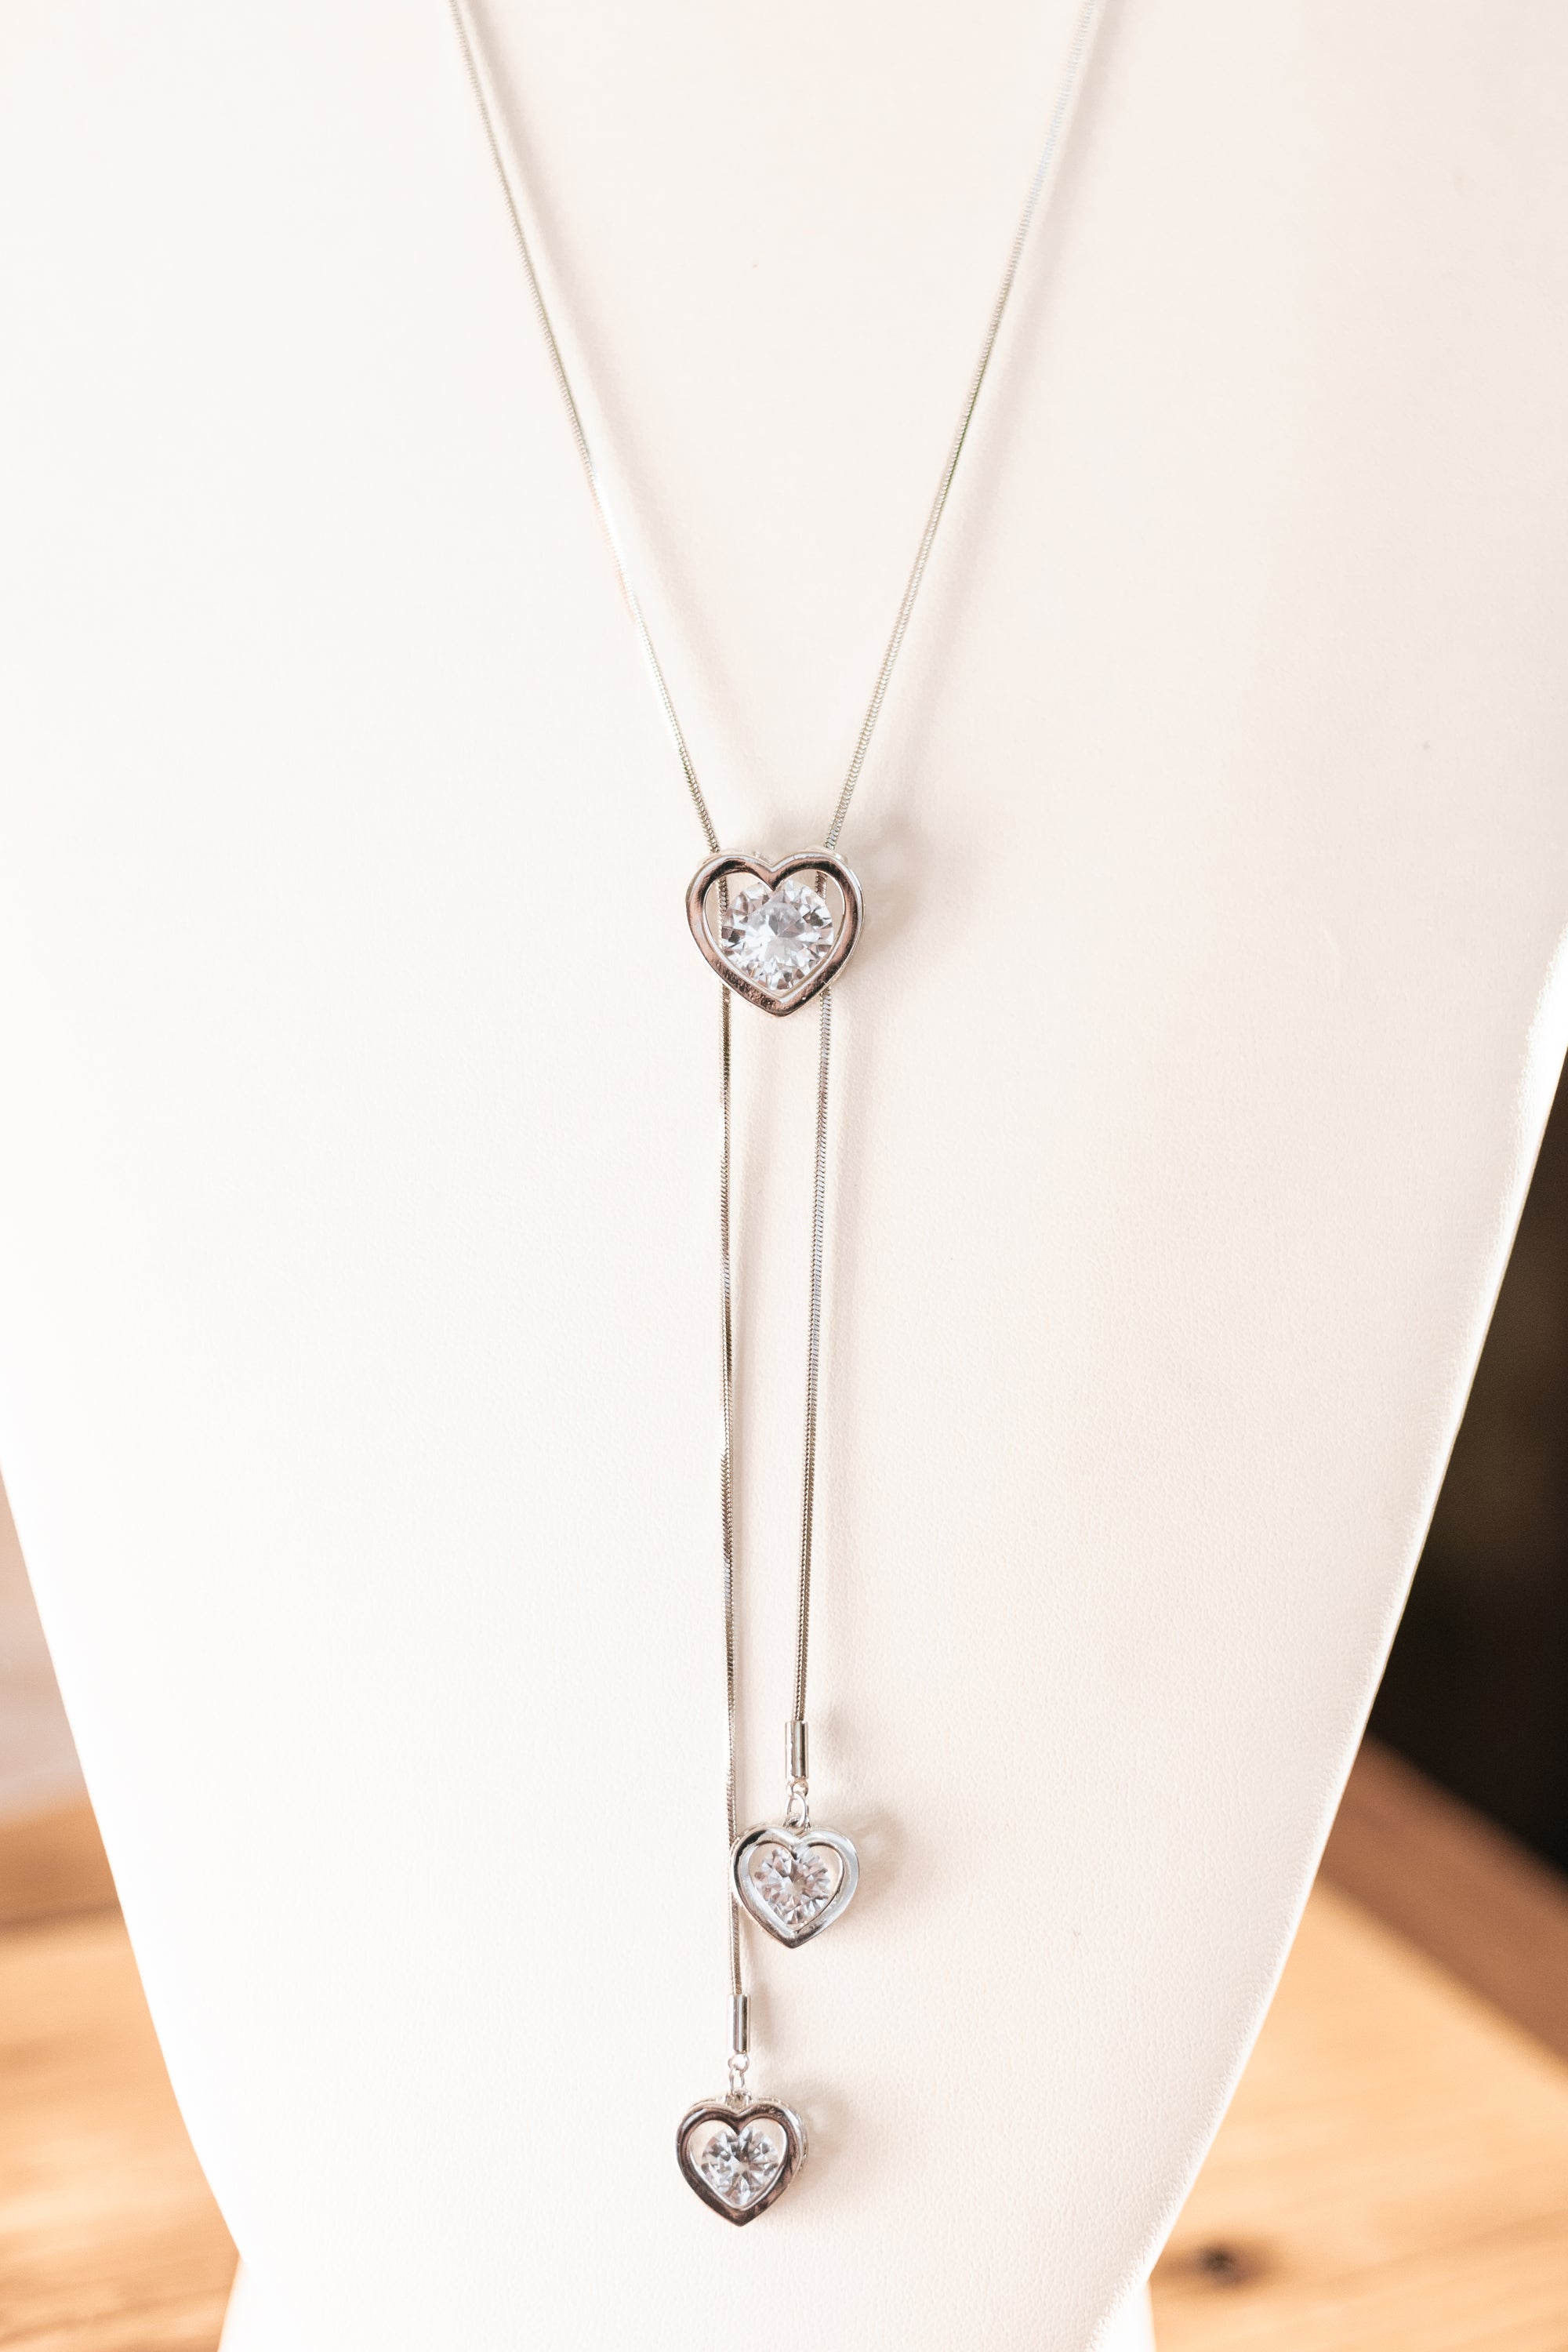 Triple Threat Heart Necklace